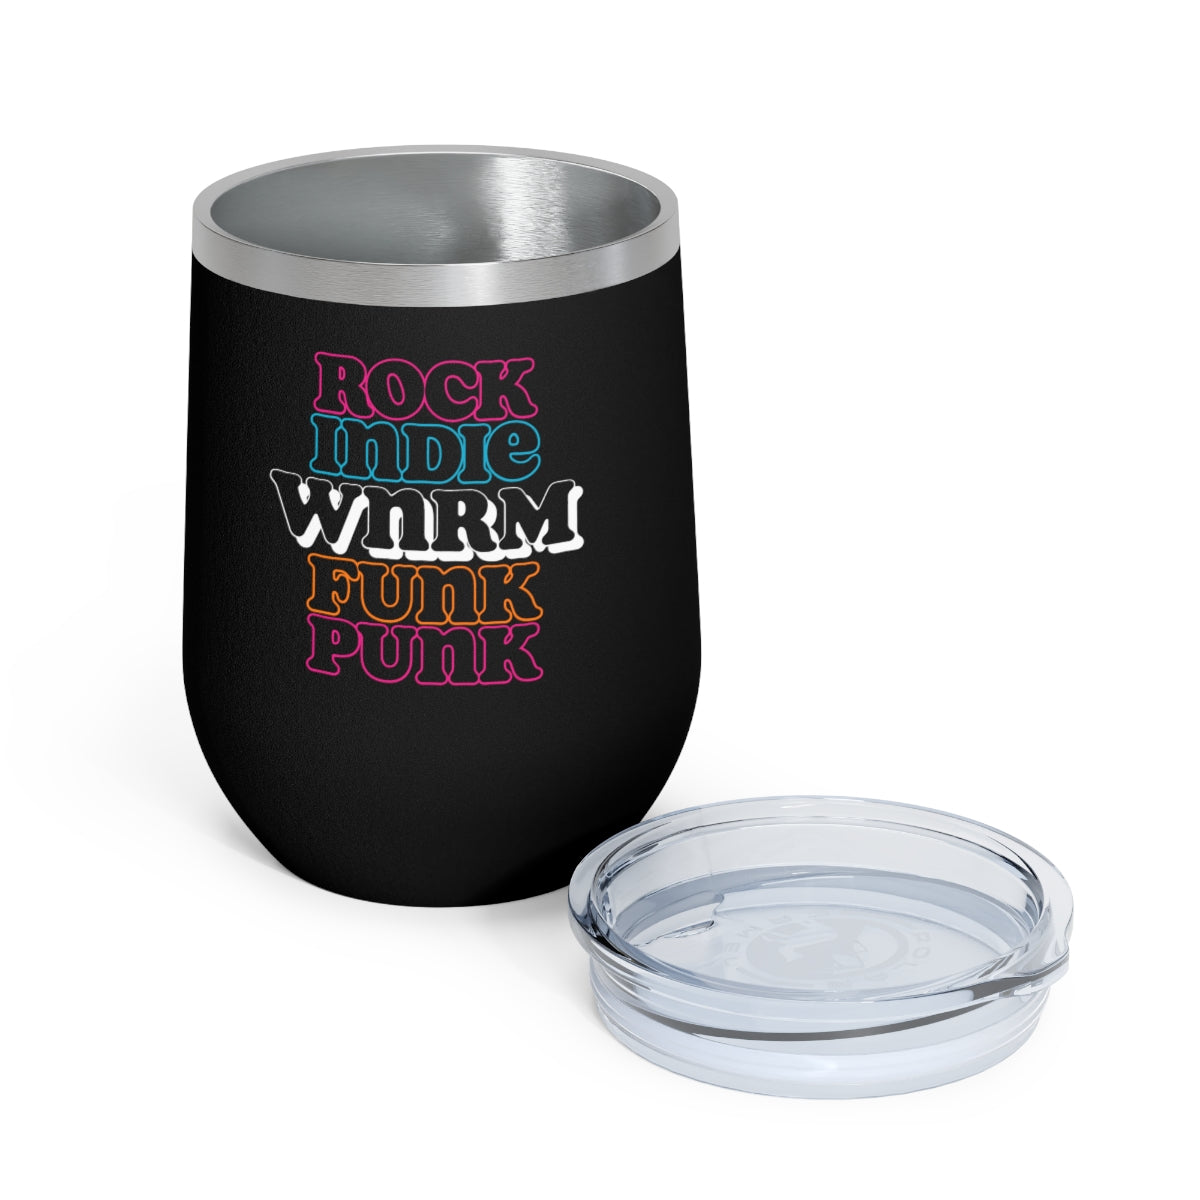 a WNRM Neon Rock, Indie, Funk, Punk wine tumbler, with lid off, on a white background